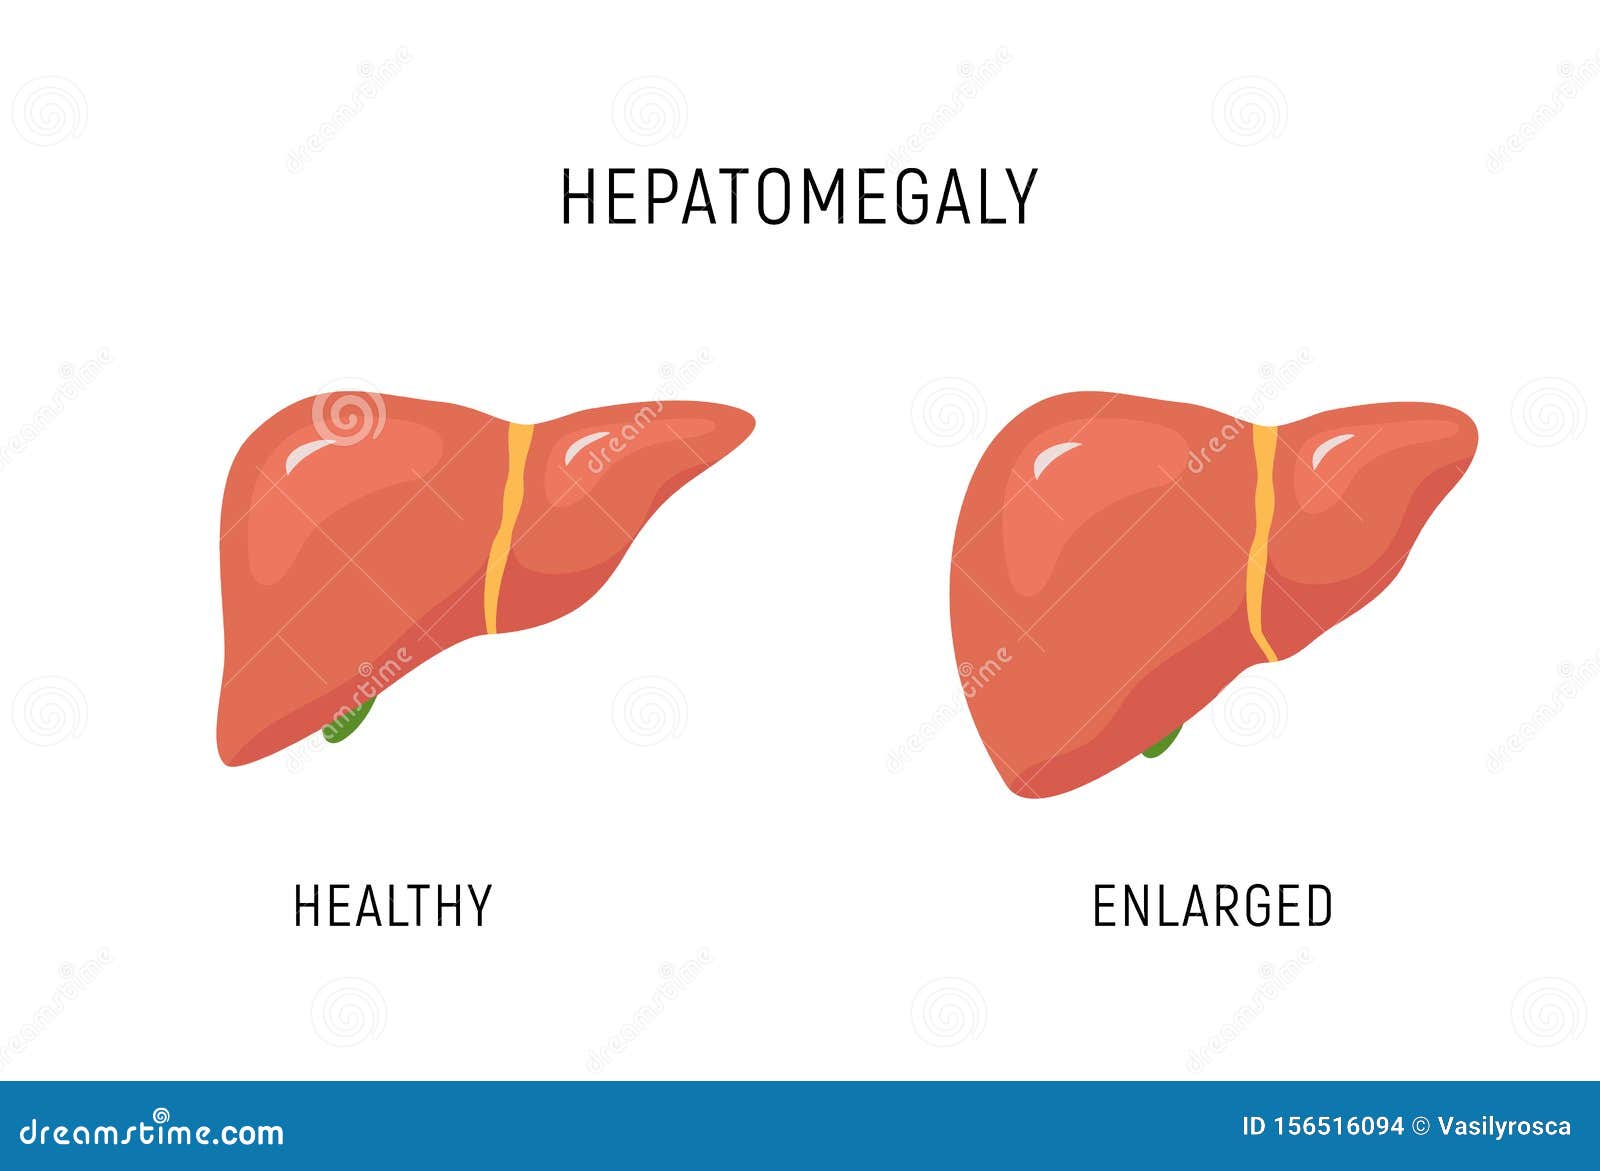 Hepatomegaly Stock Illustrations 33 Hepatomegaly Stock Illustrations Vectors Clipart Dreamstime